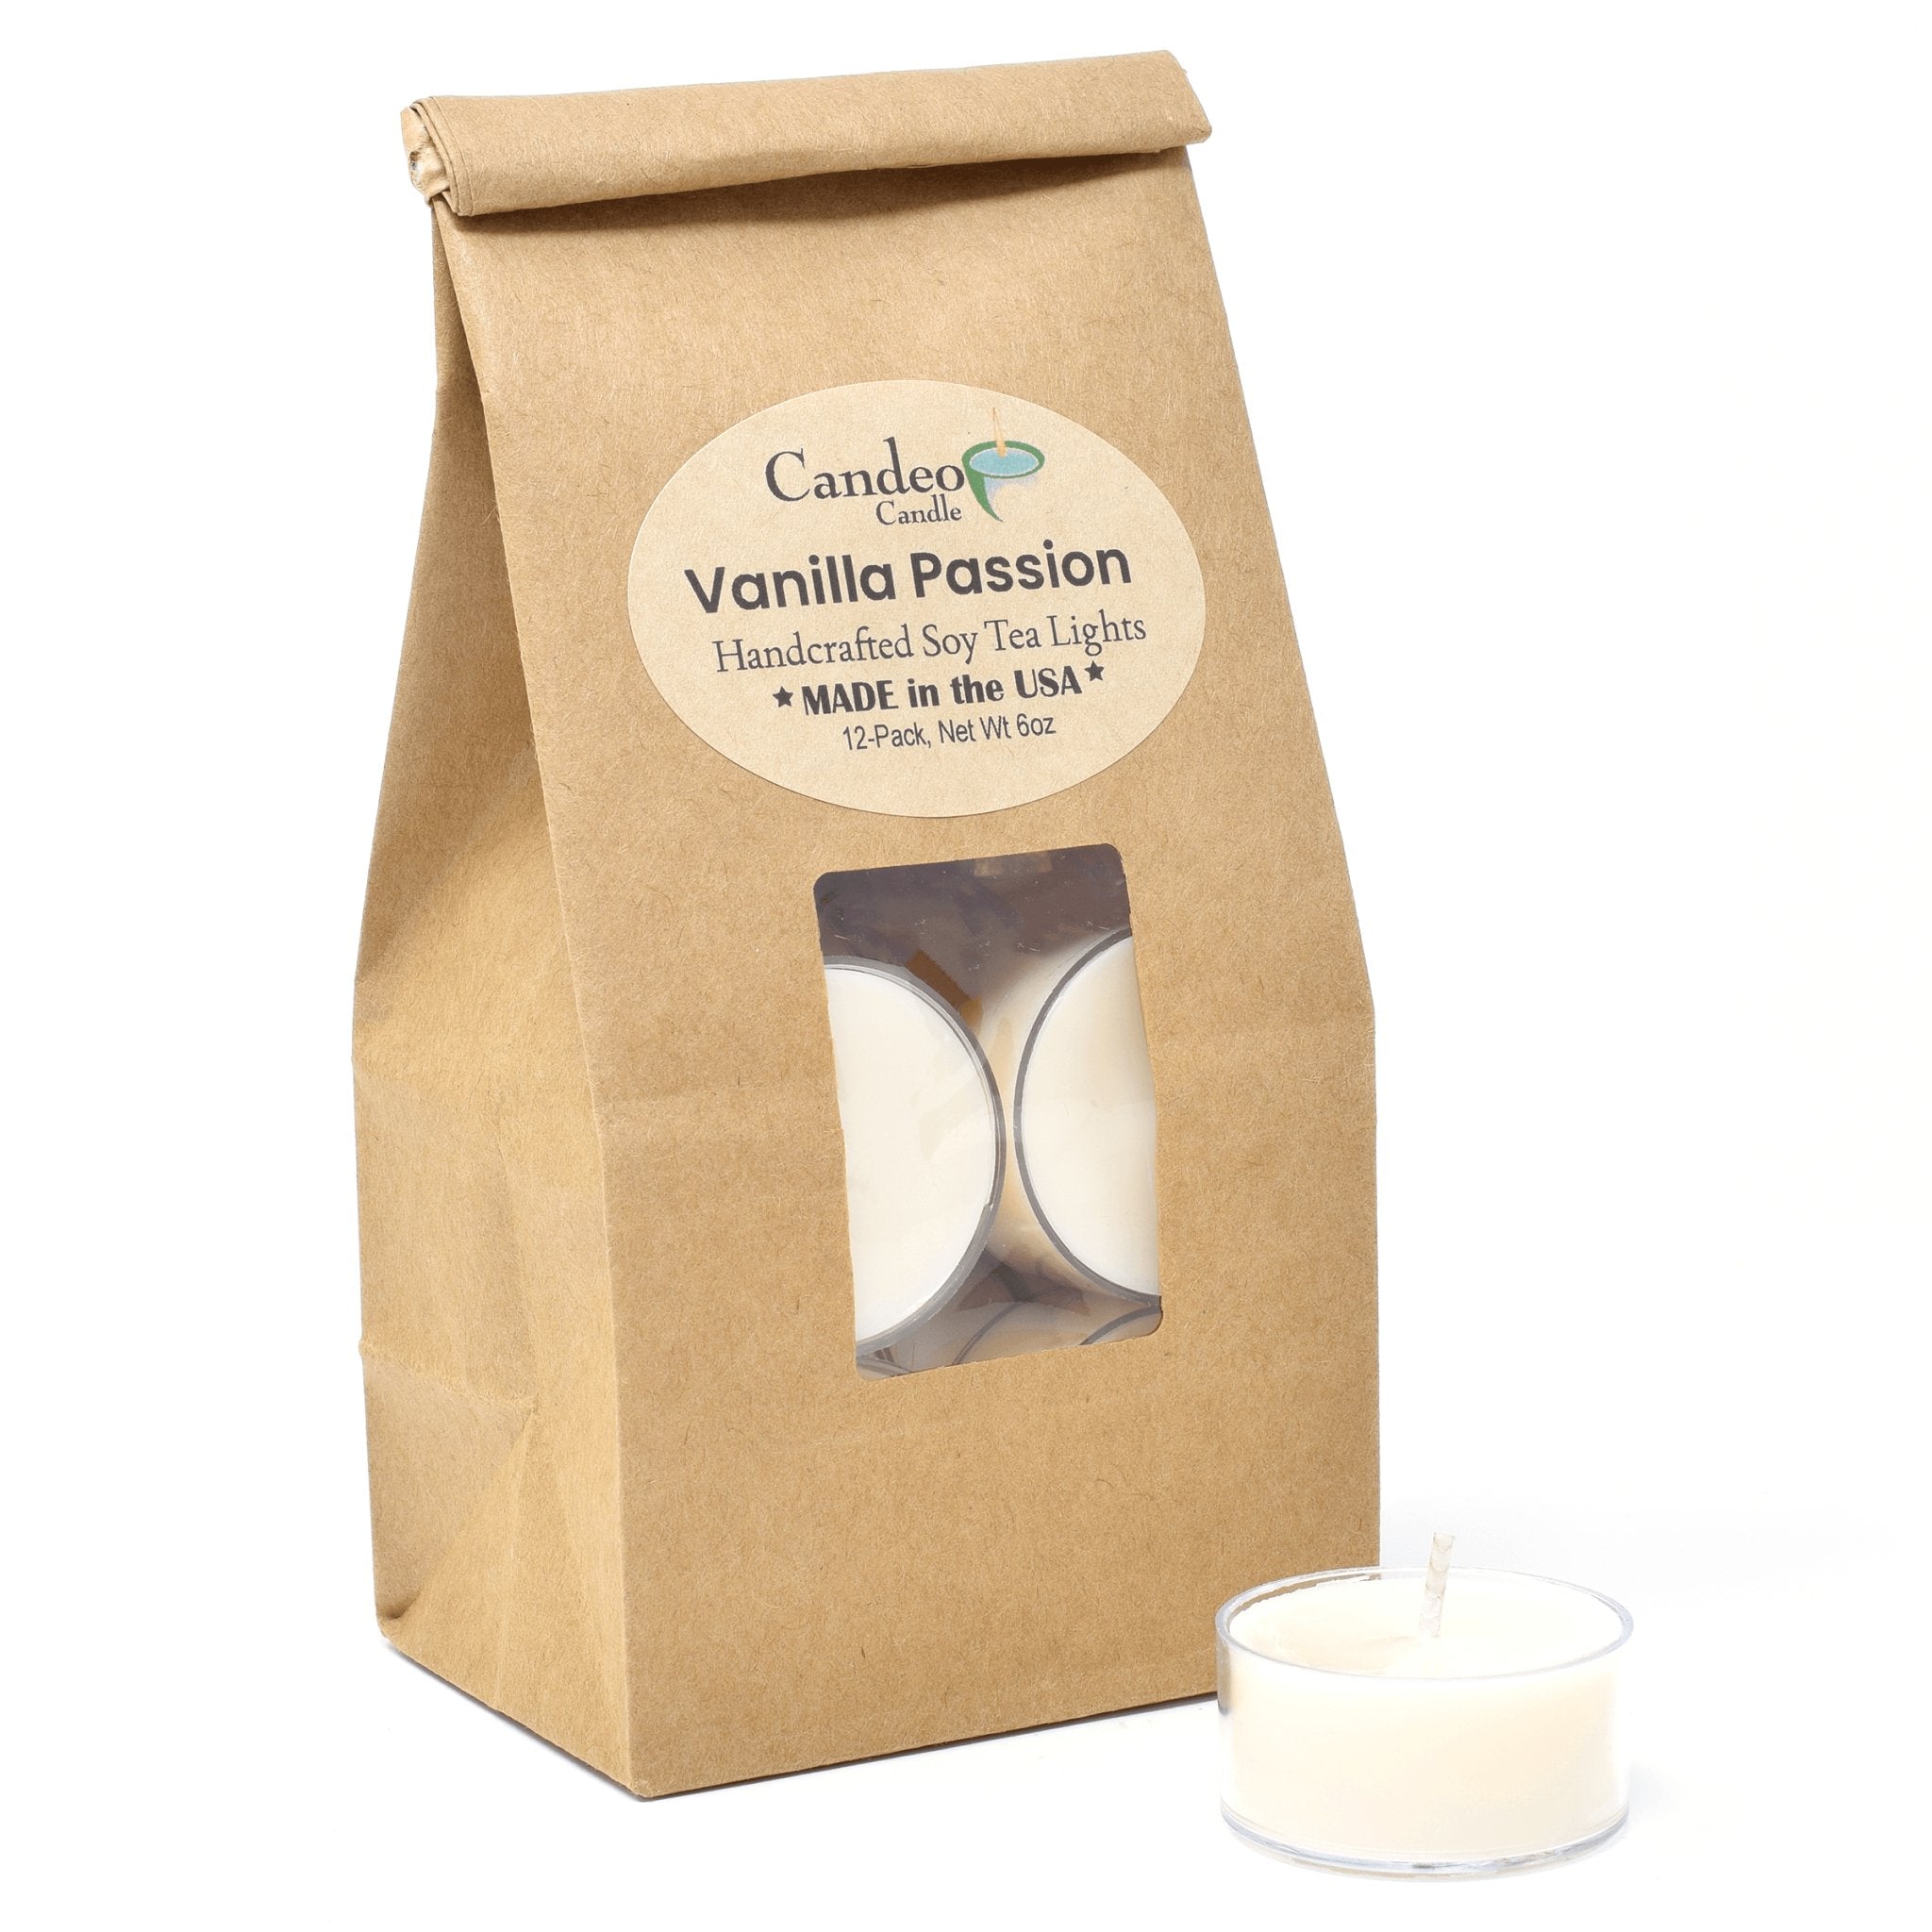 Vanilla Bean Wax Melts Bulk Pack - 4 Highly Scented Bars - Made with Natural Oils - Bakery & Food Air Freshener Cubes Collection